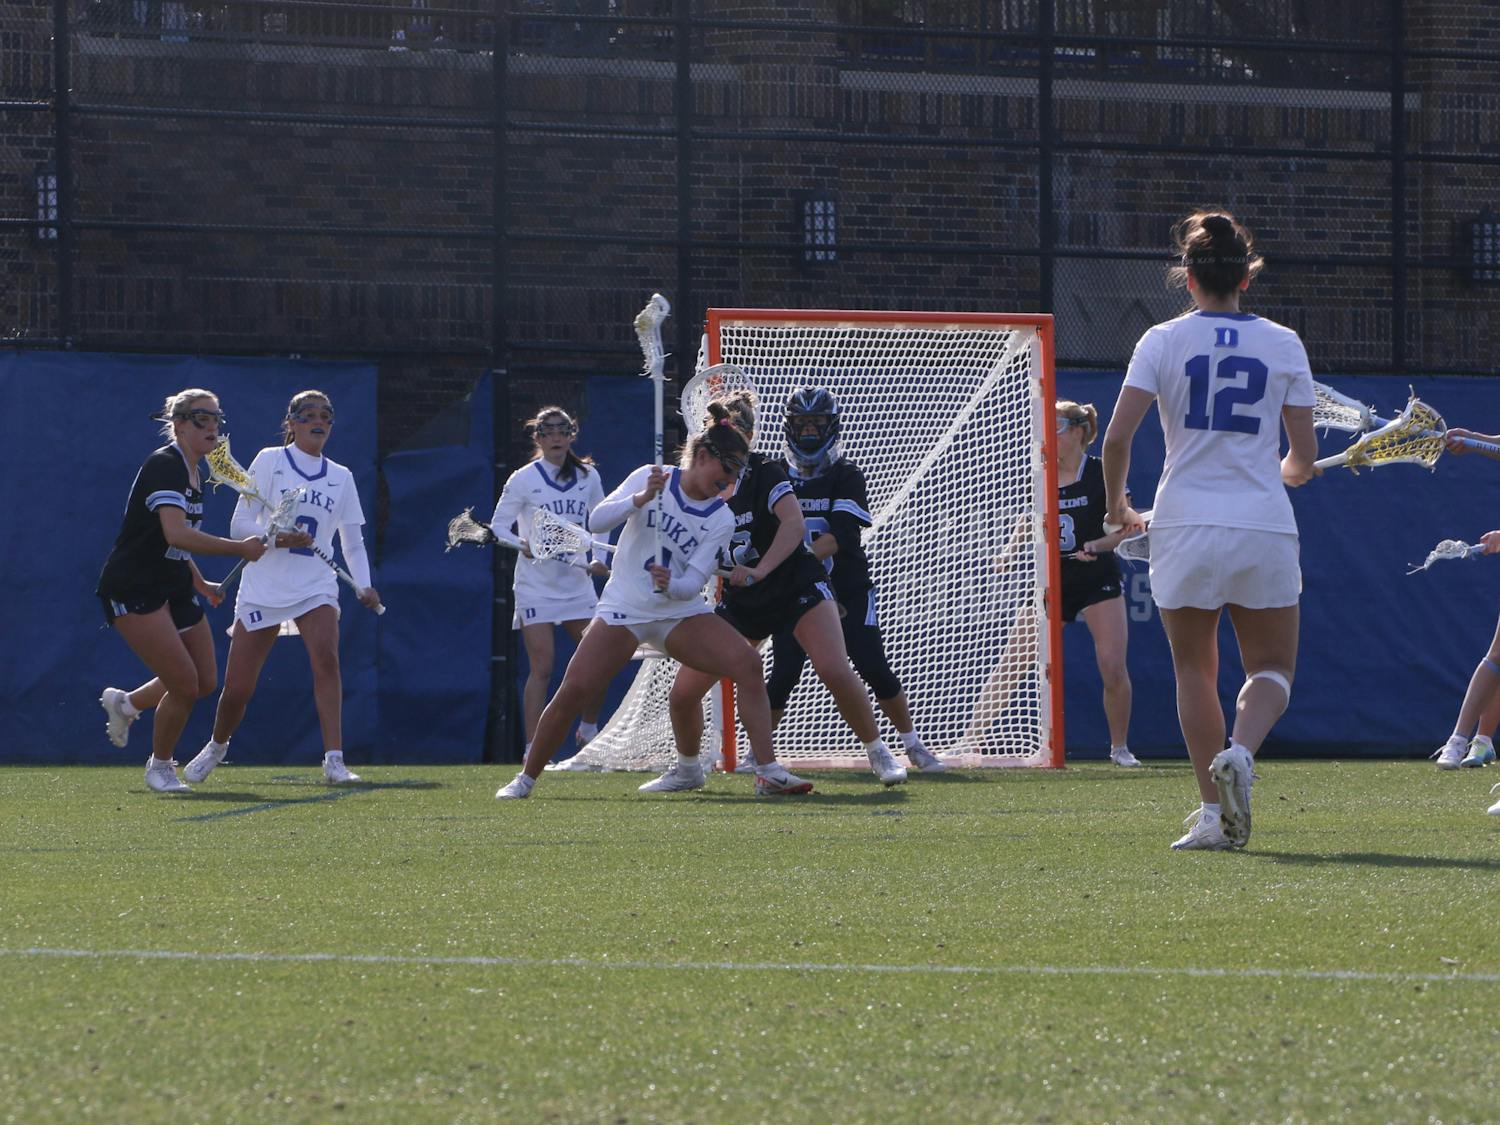 Senior attacker Katie DeSimone works against her defender in Saturday's hard-fought loss to Johns Hopkins. 